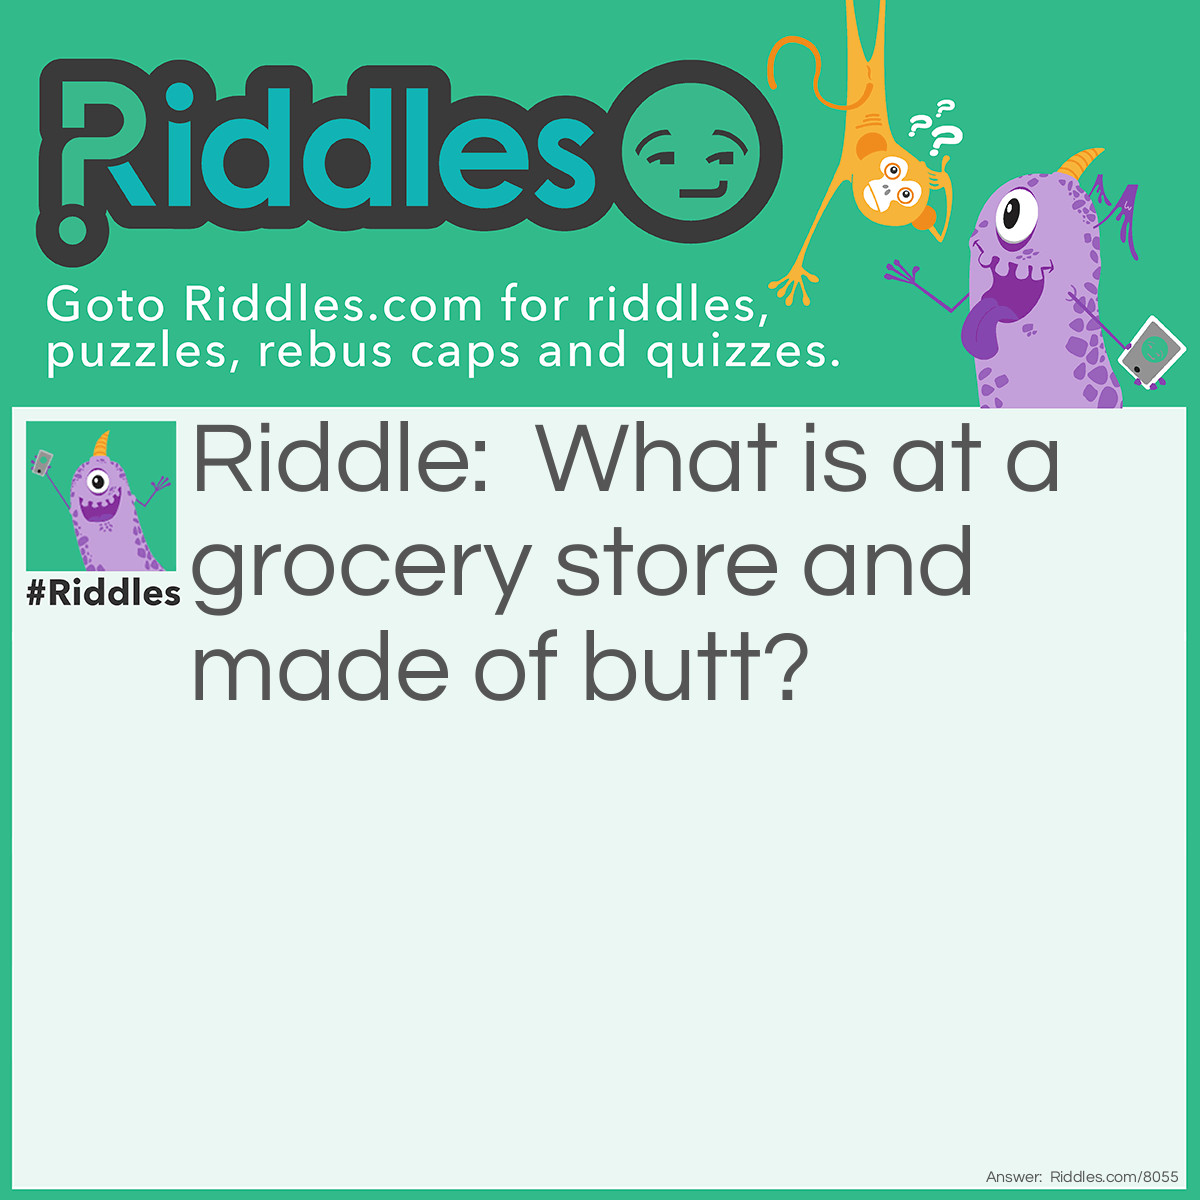 Riddle: What is at a grocery store and made of butt? Answer: Bacon!